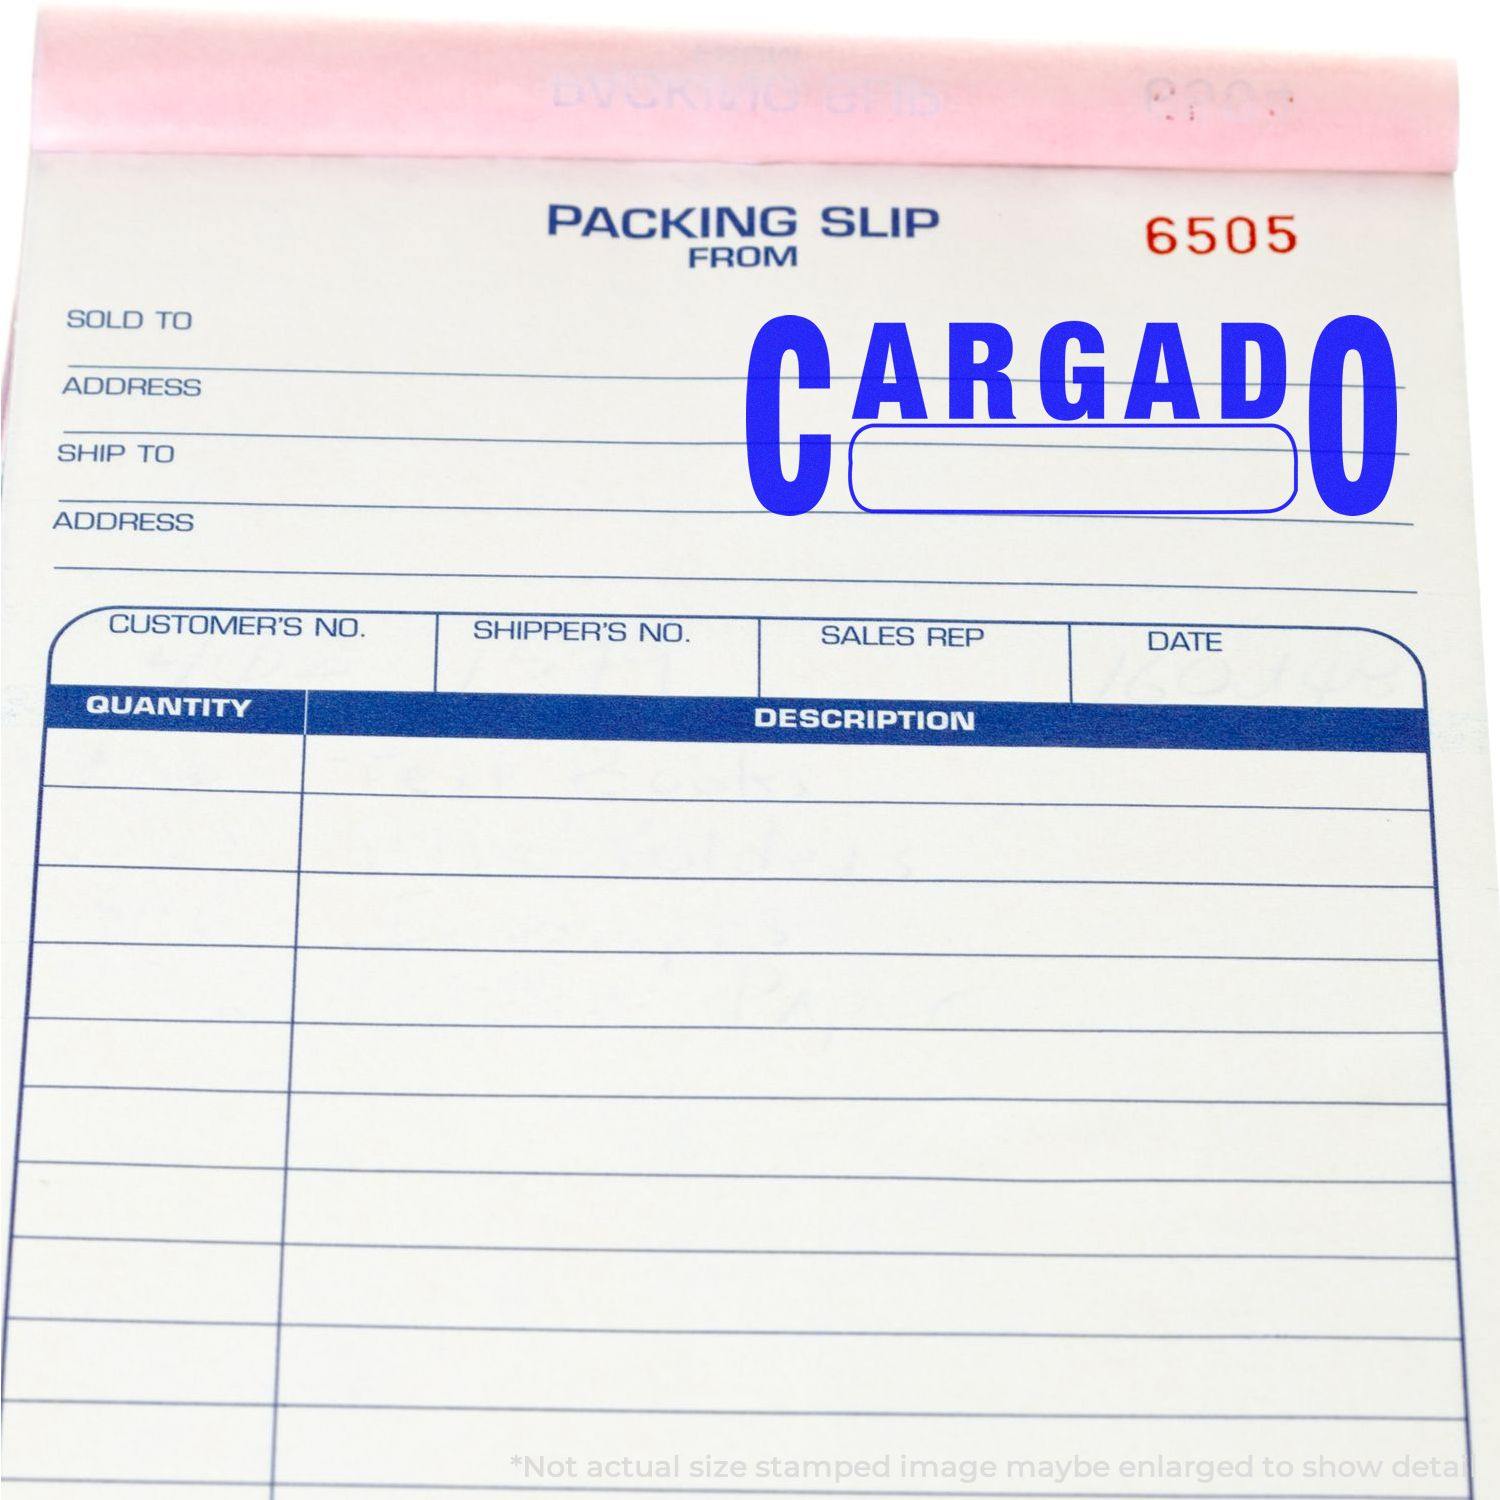 A stock office rubber stamp with a stamped image showing how the text "CARGADO" with a box is displayed after stamping.